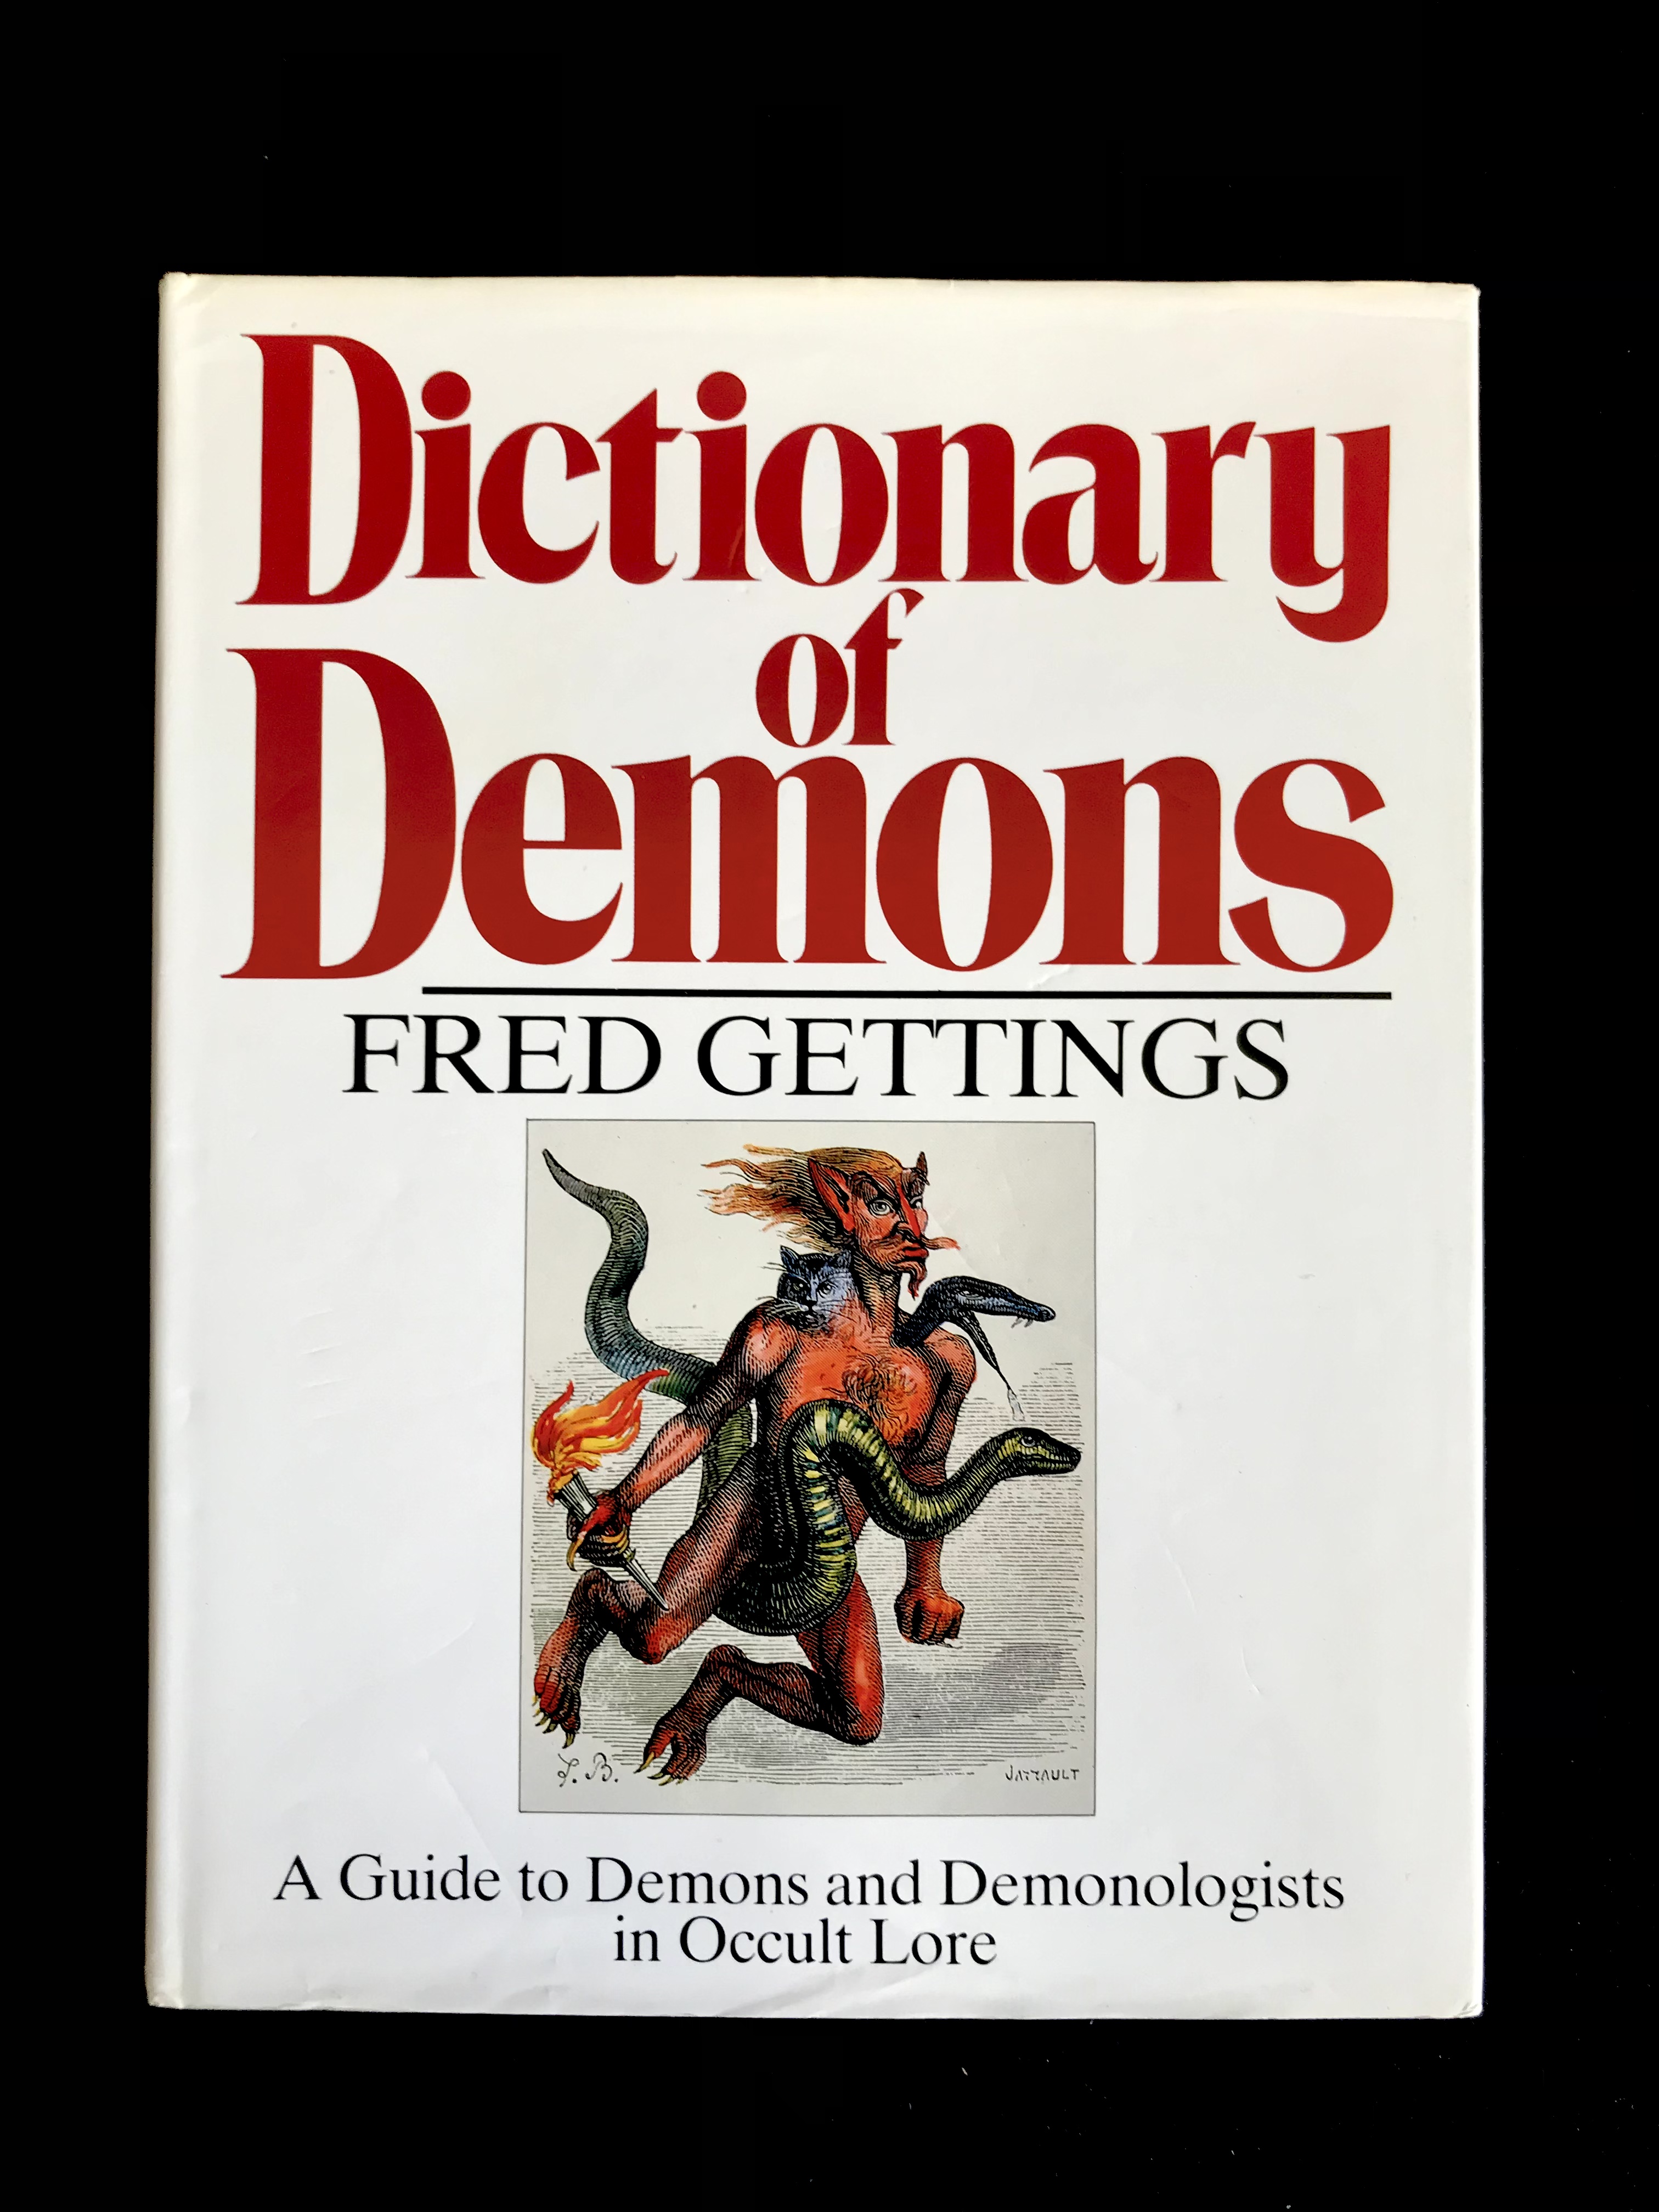 Dictionary of Demons by Fred Gettings